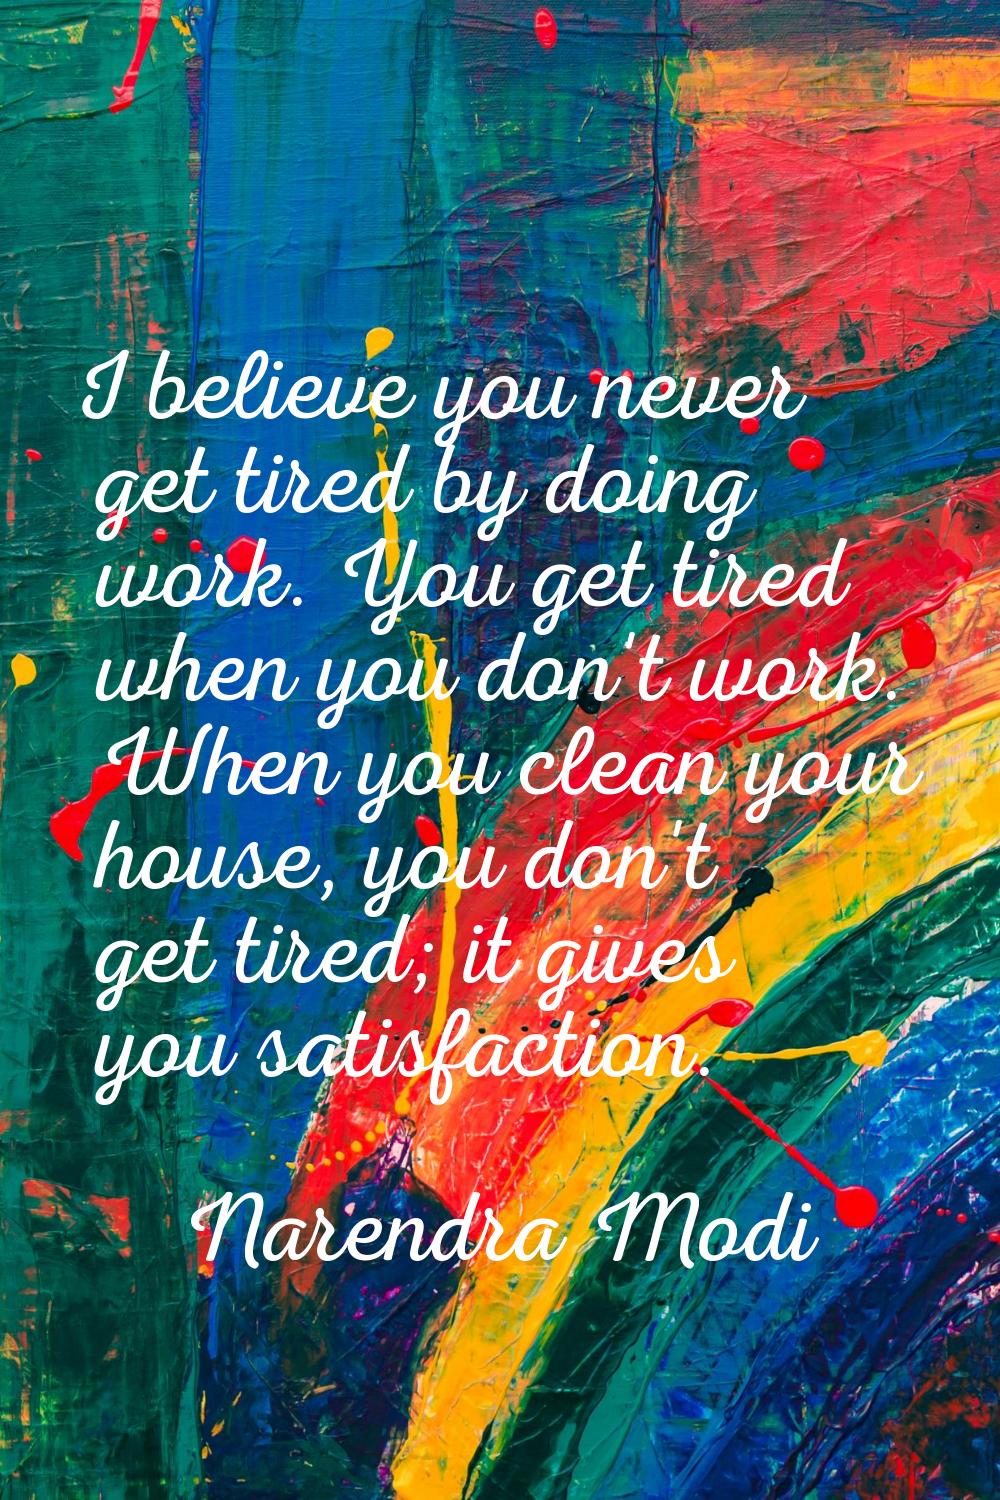 I believe you never get tired by doing work. You get tired when you don't work. When you clean your